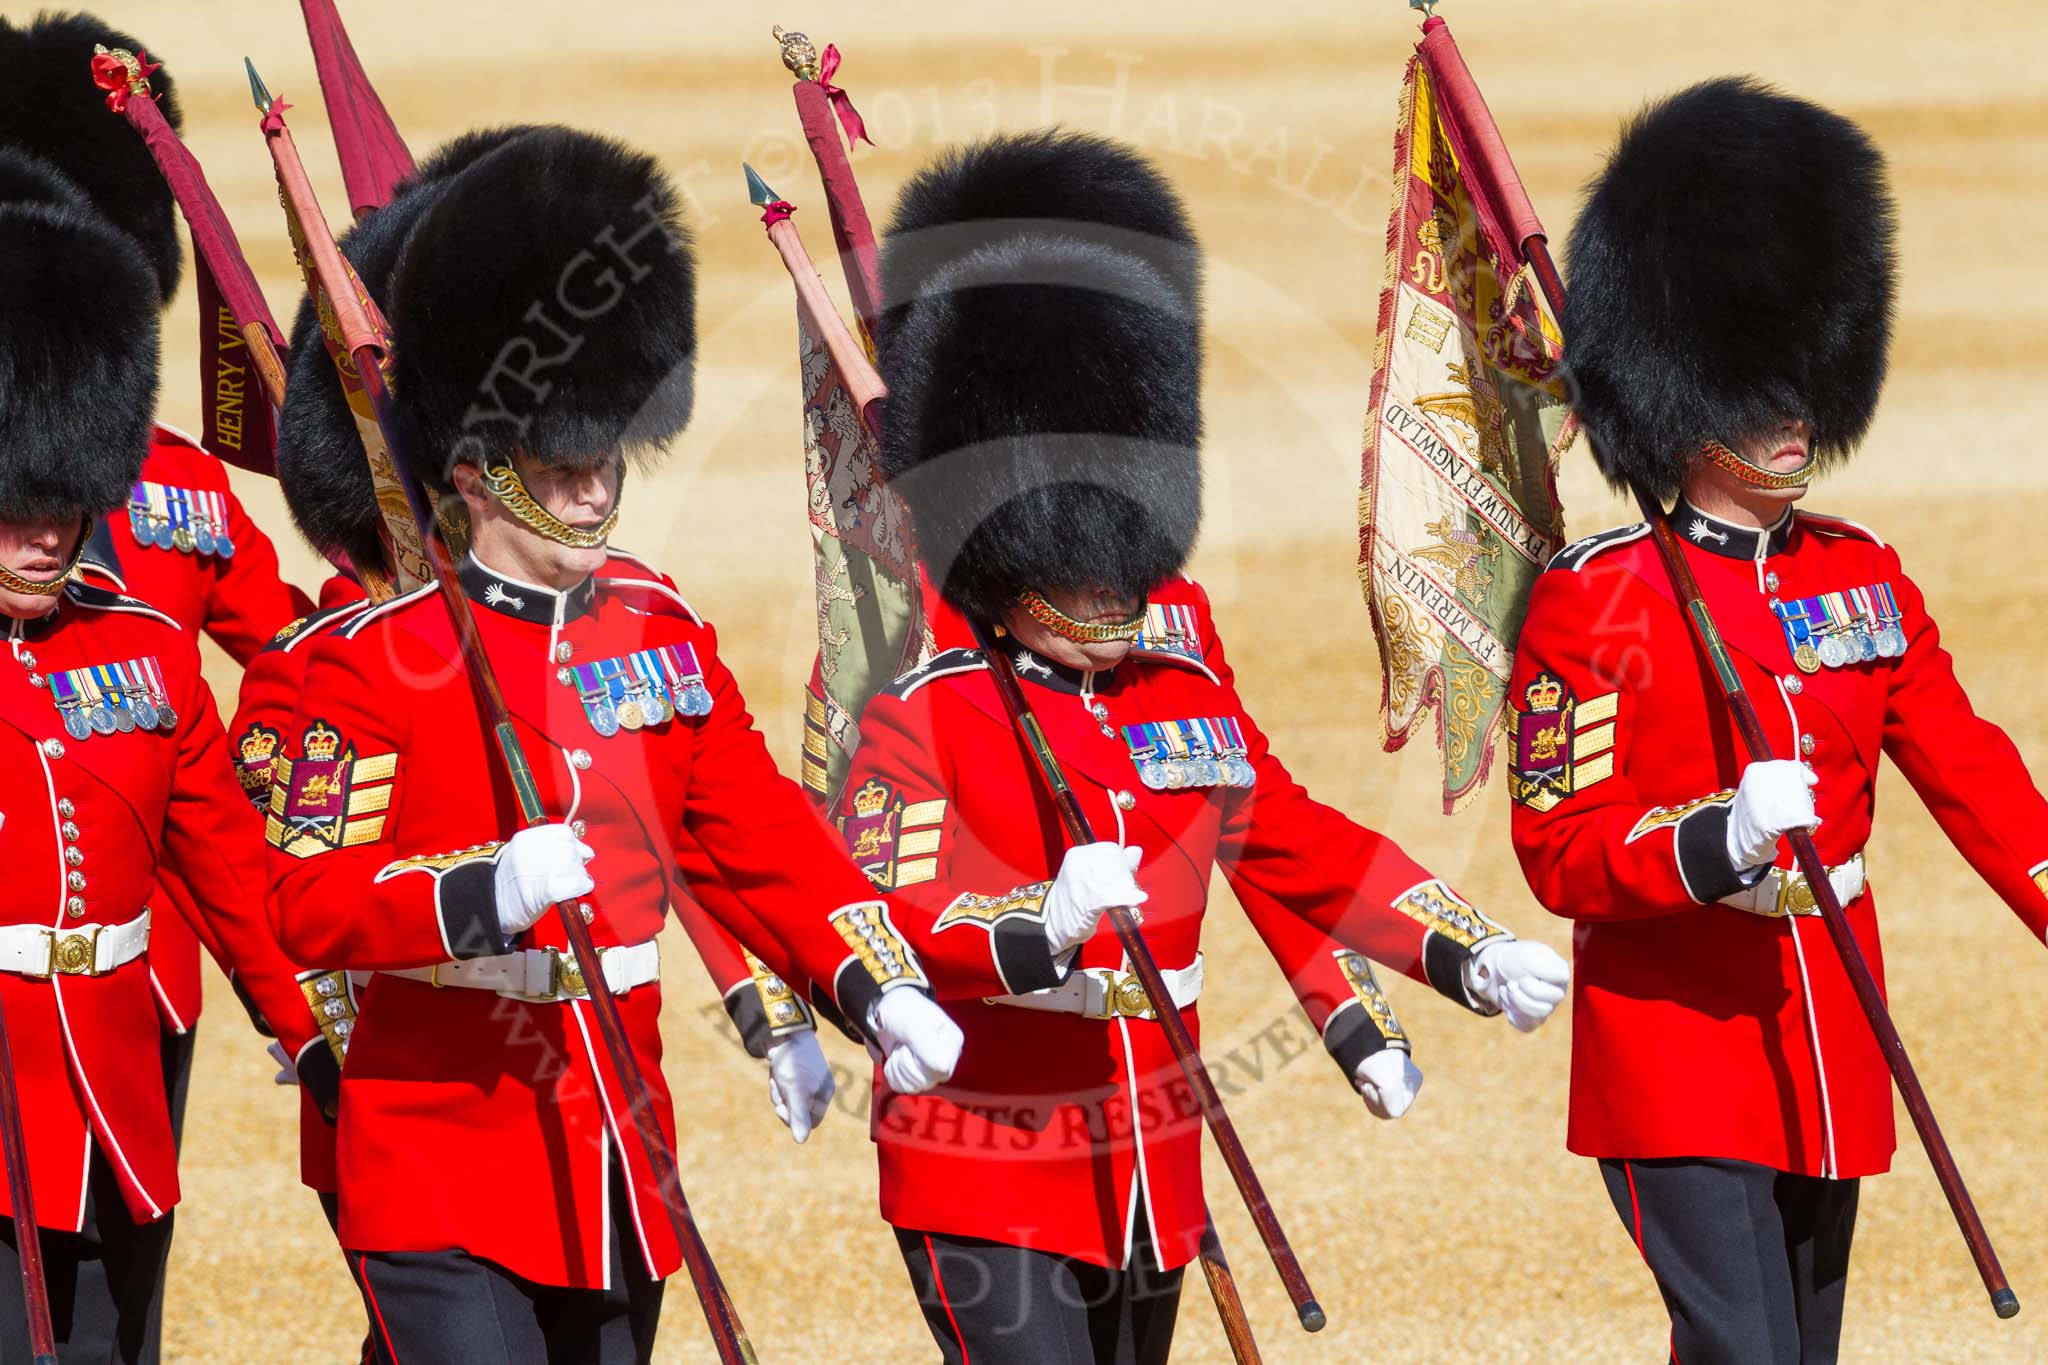 The 'Keepers of the Ground', guardsmen bearing marker flags for their respective regiments, marching towards Horse Guards Arch.